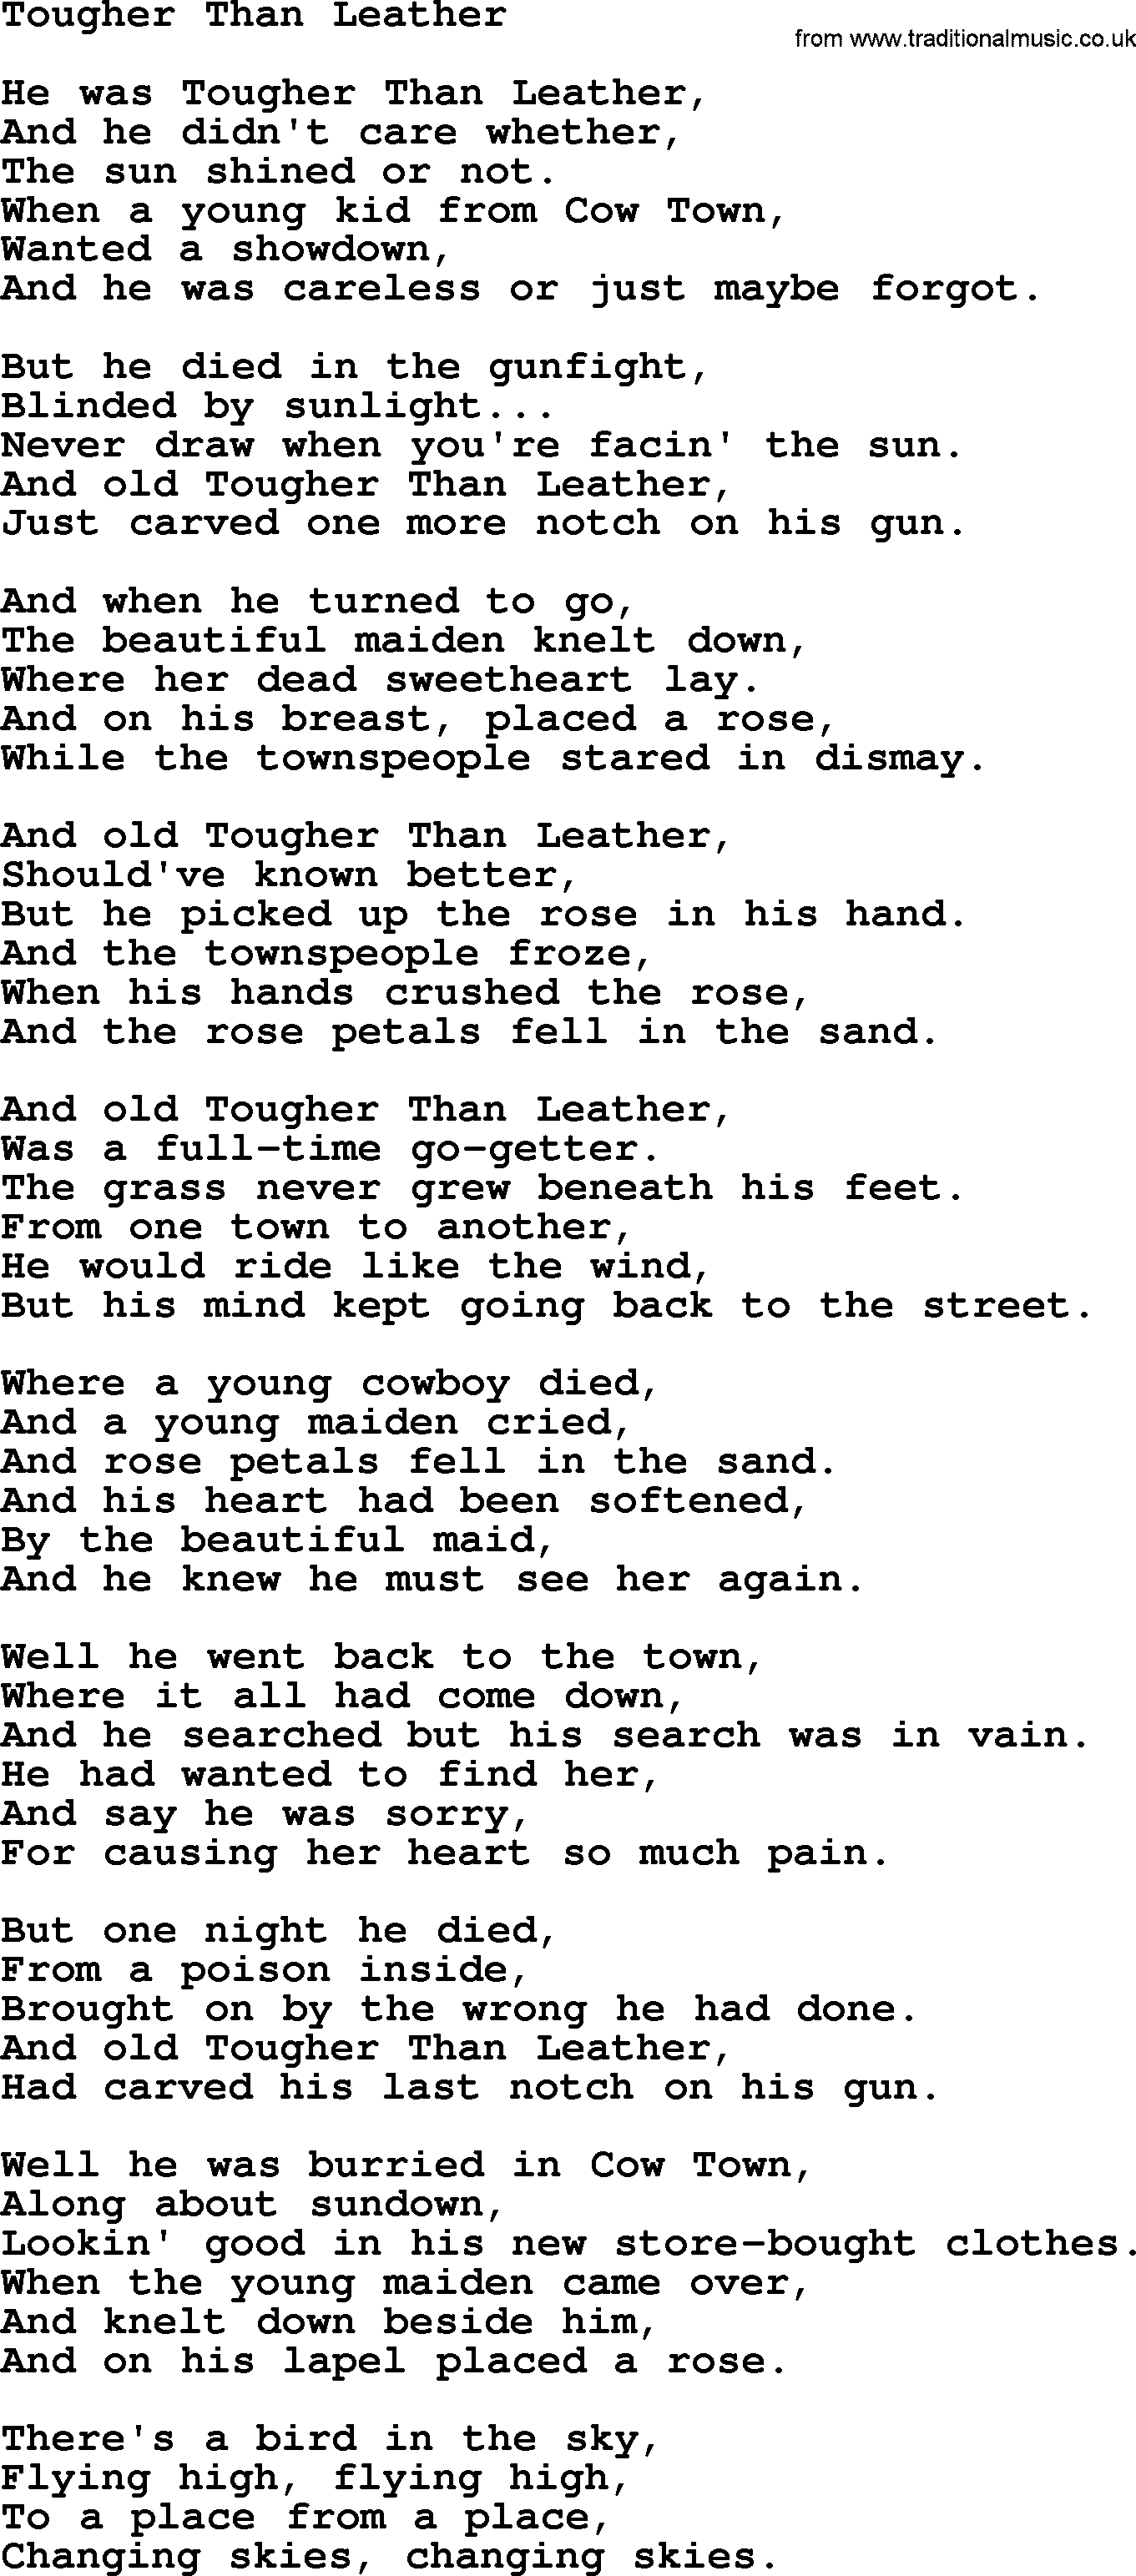 Willie Nelson song: Tougher Than Leather lyrics